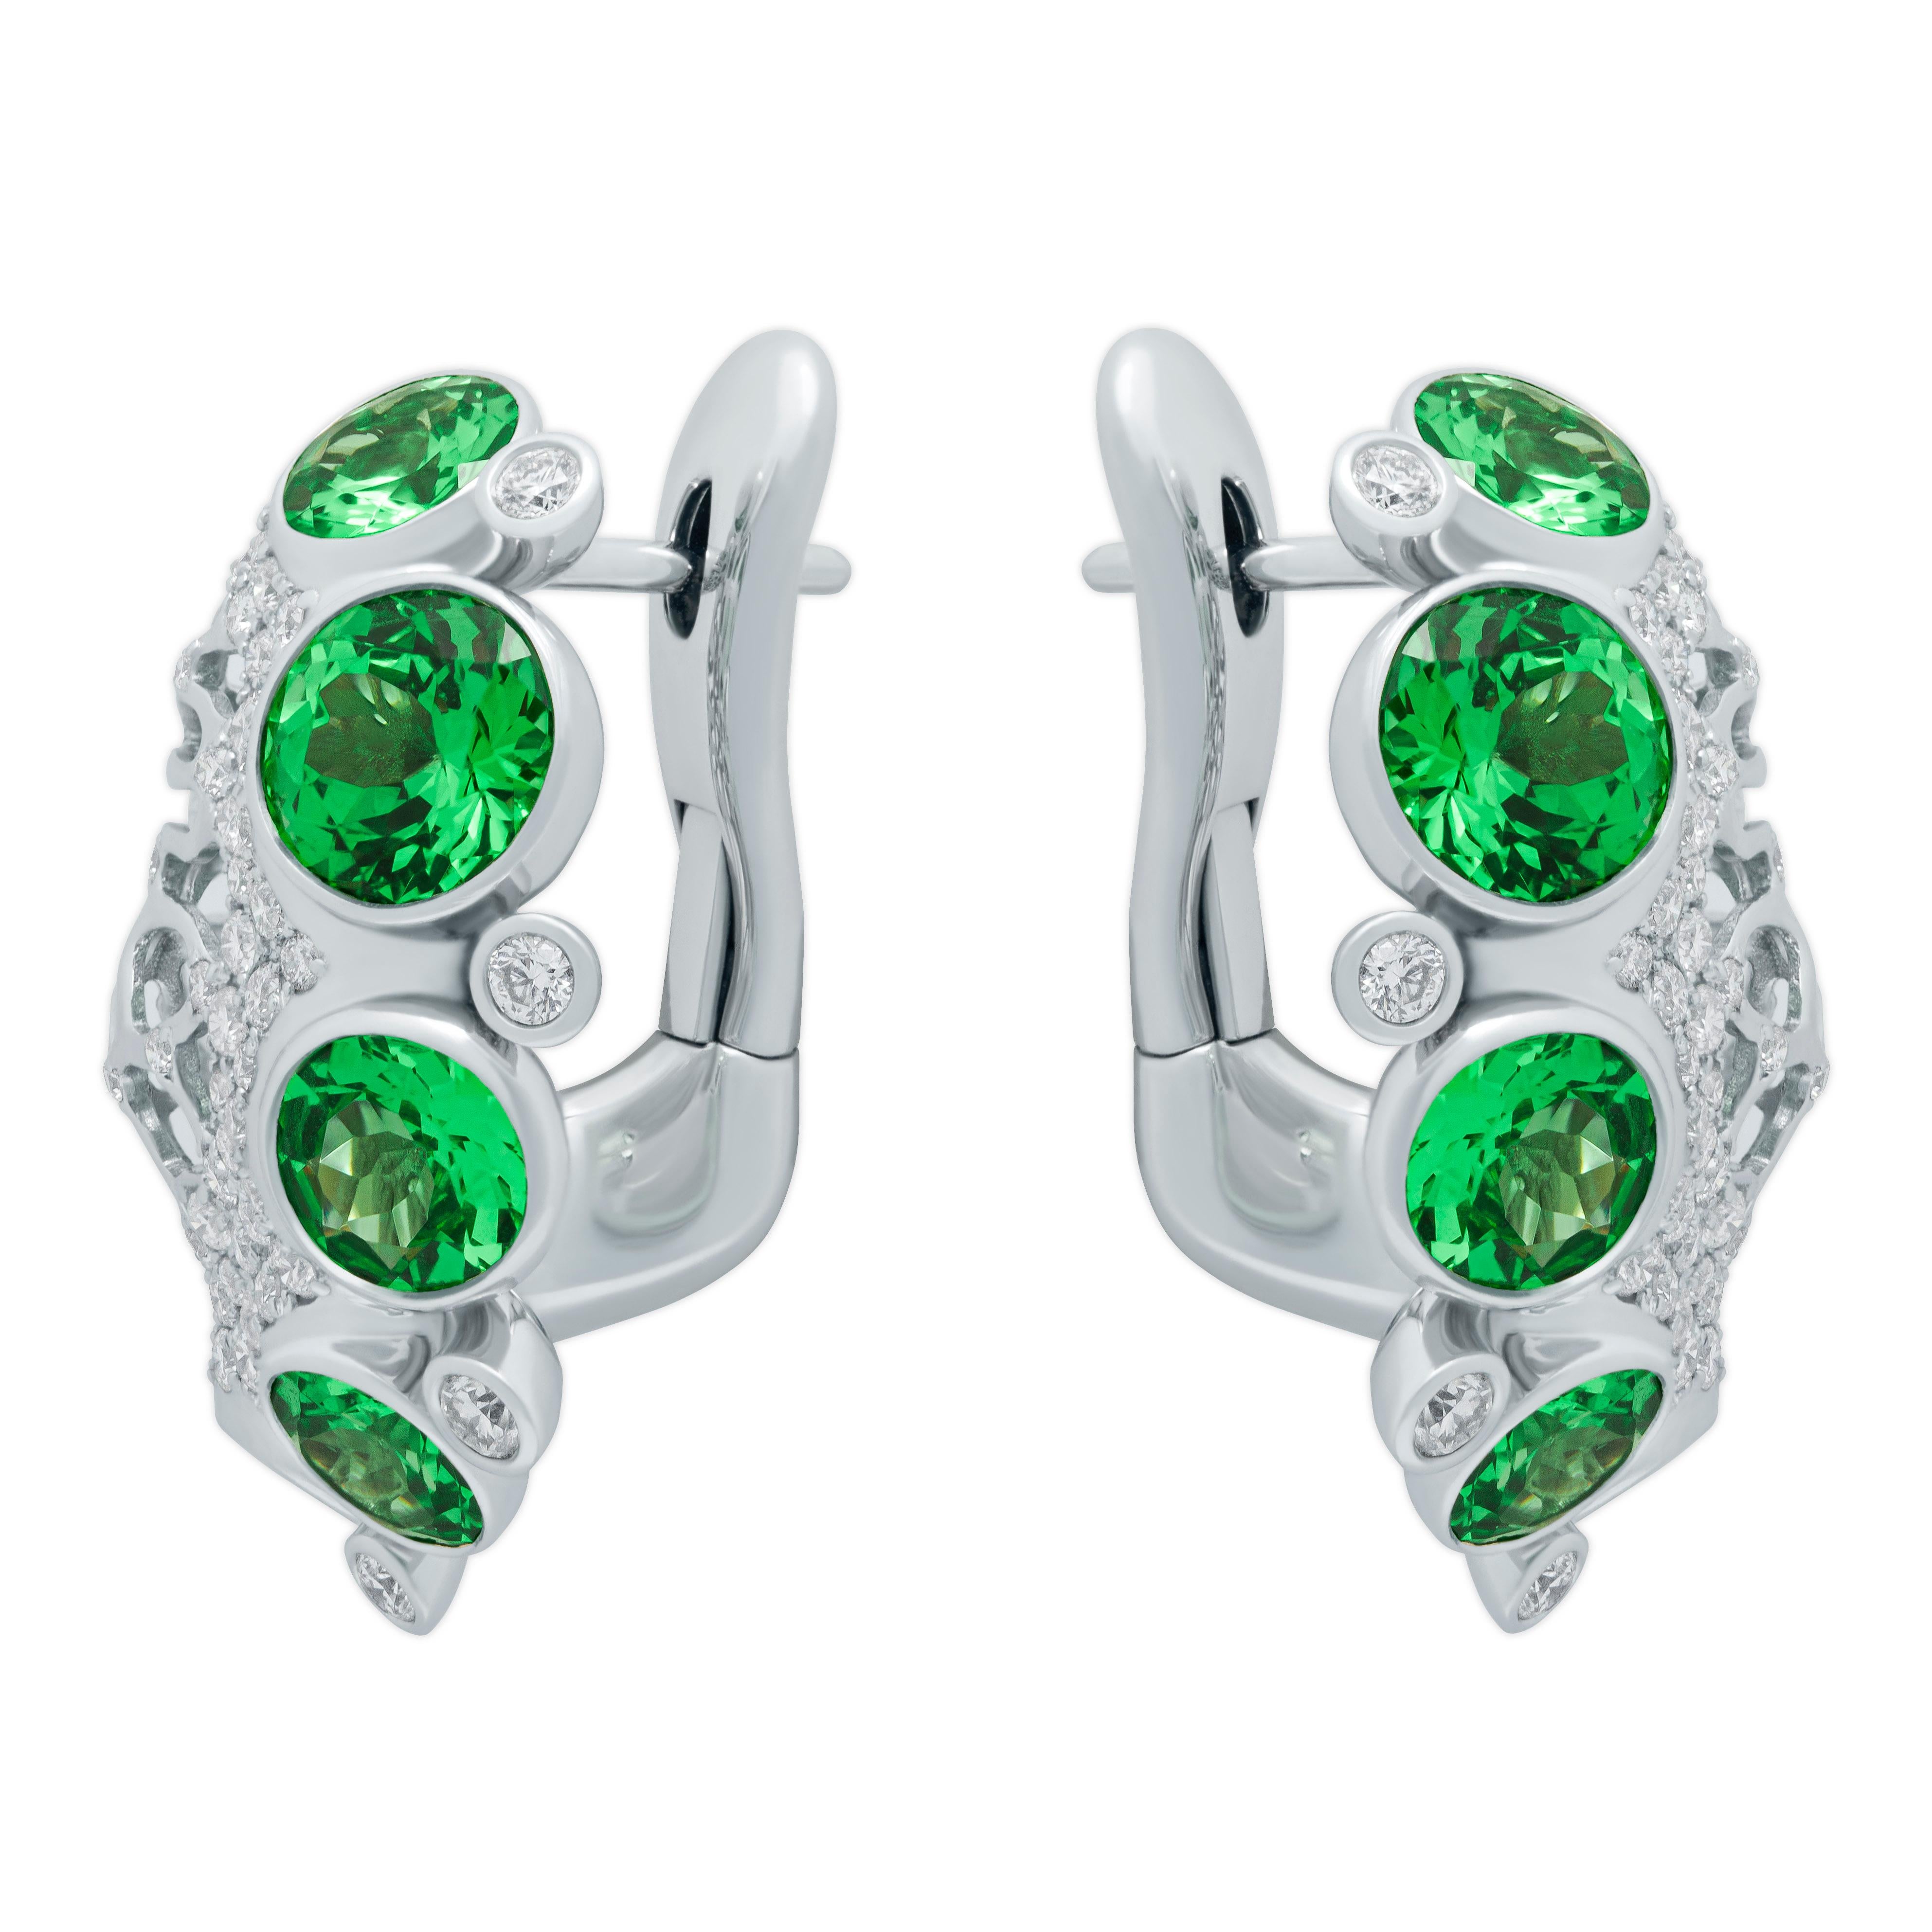 Tsavorite and Diamonds 18 Karat White Gold Earrings

Pure Green color in combination with Diamonds looks stunning from our Coral Reef Collection
Accompanied with the ring LU116414714581

14.50 x 24.20 mm (WxL)
Weight - 9.79 gm